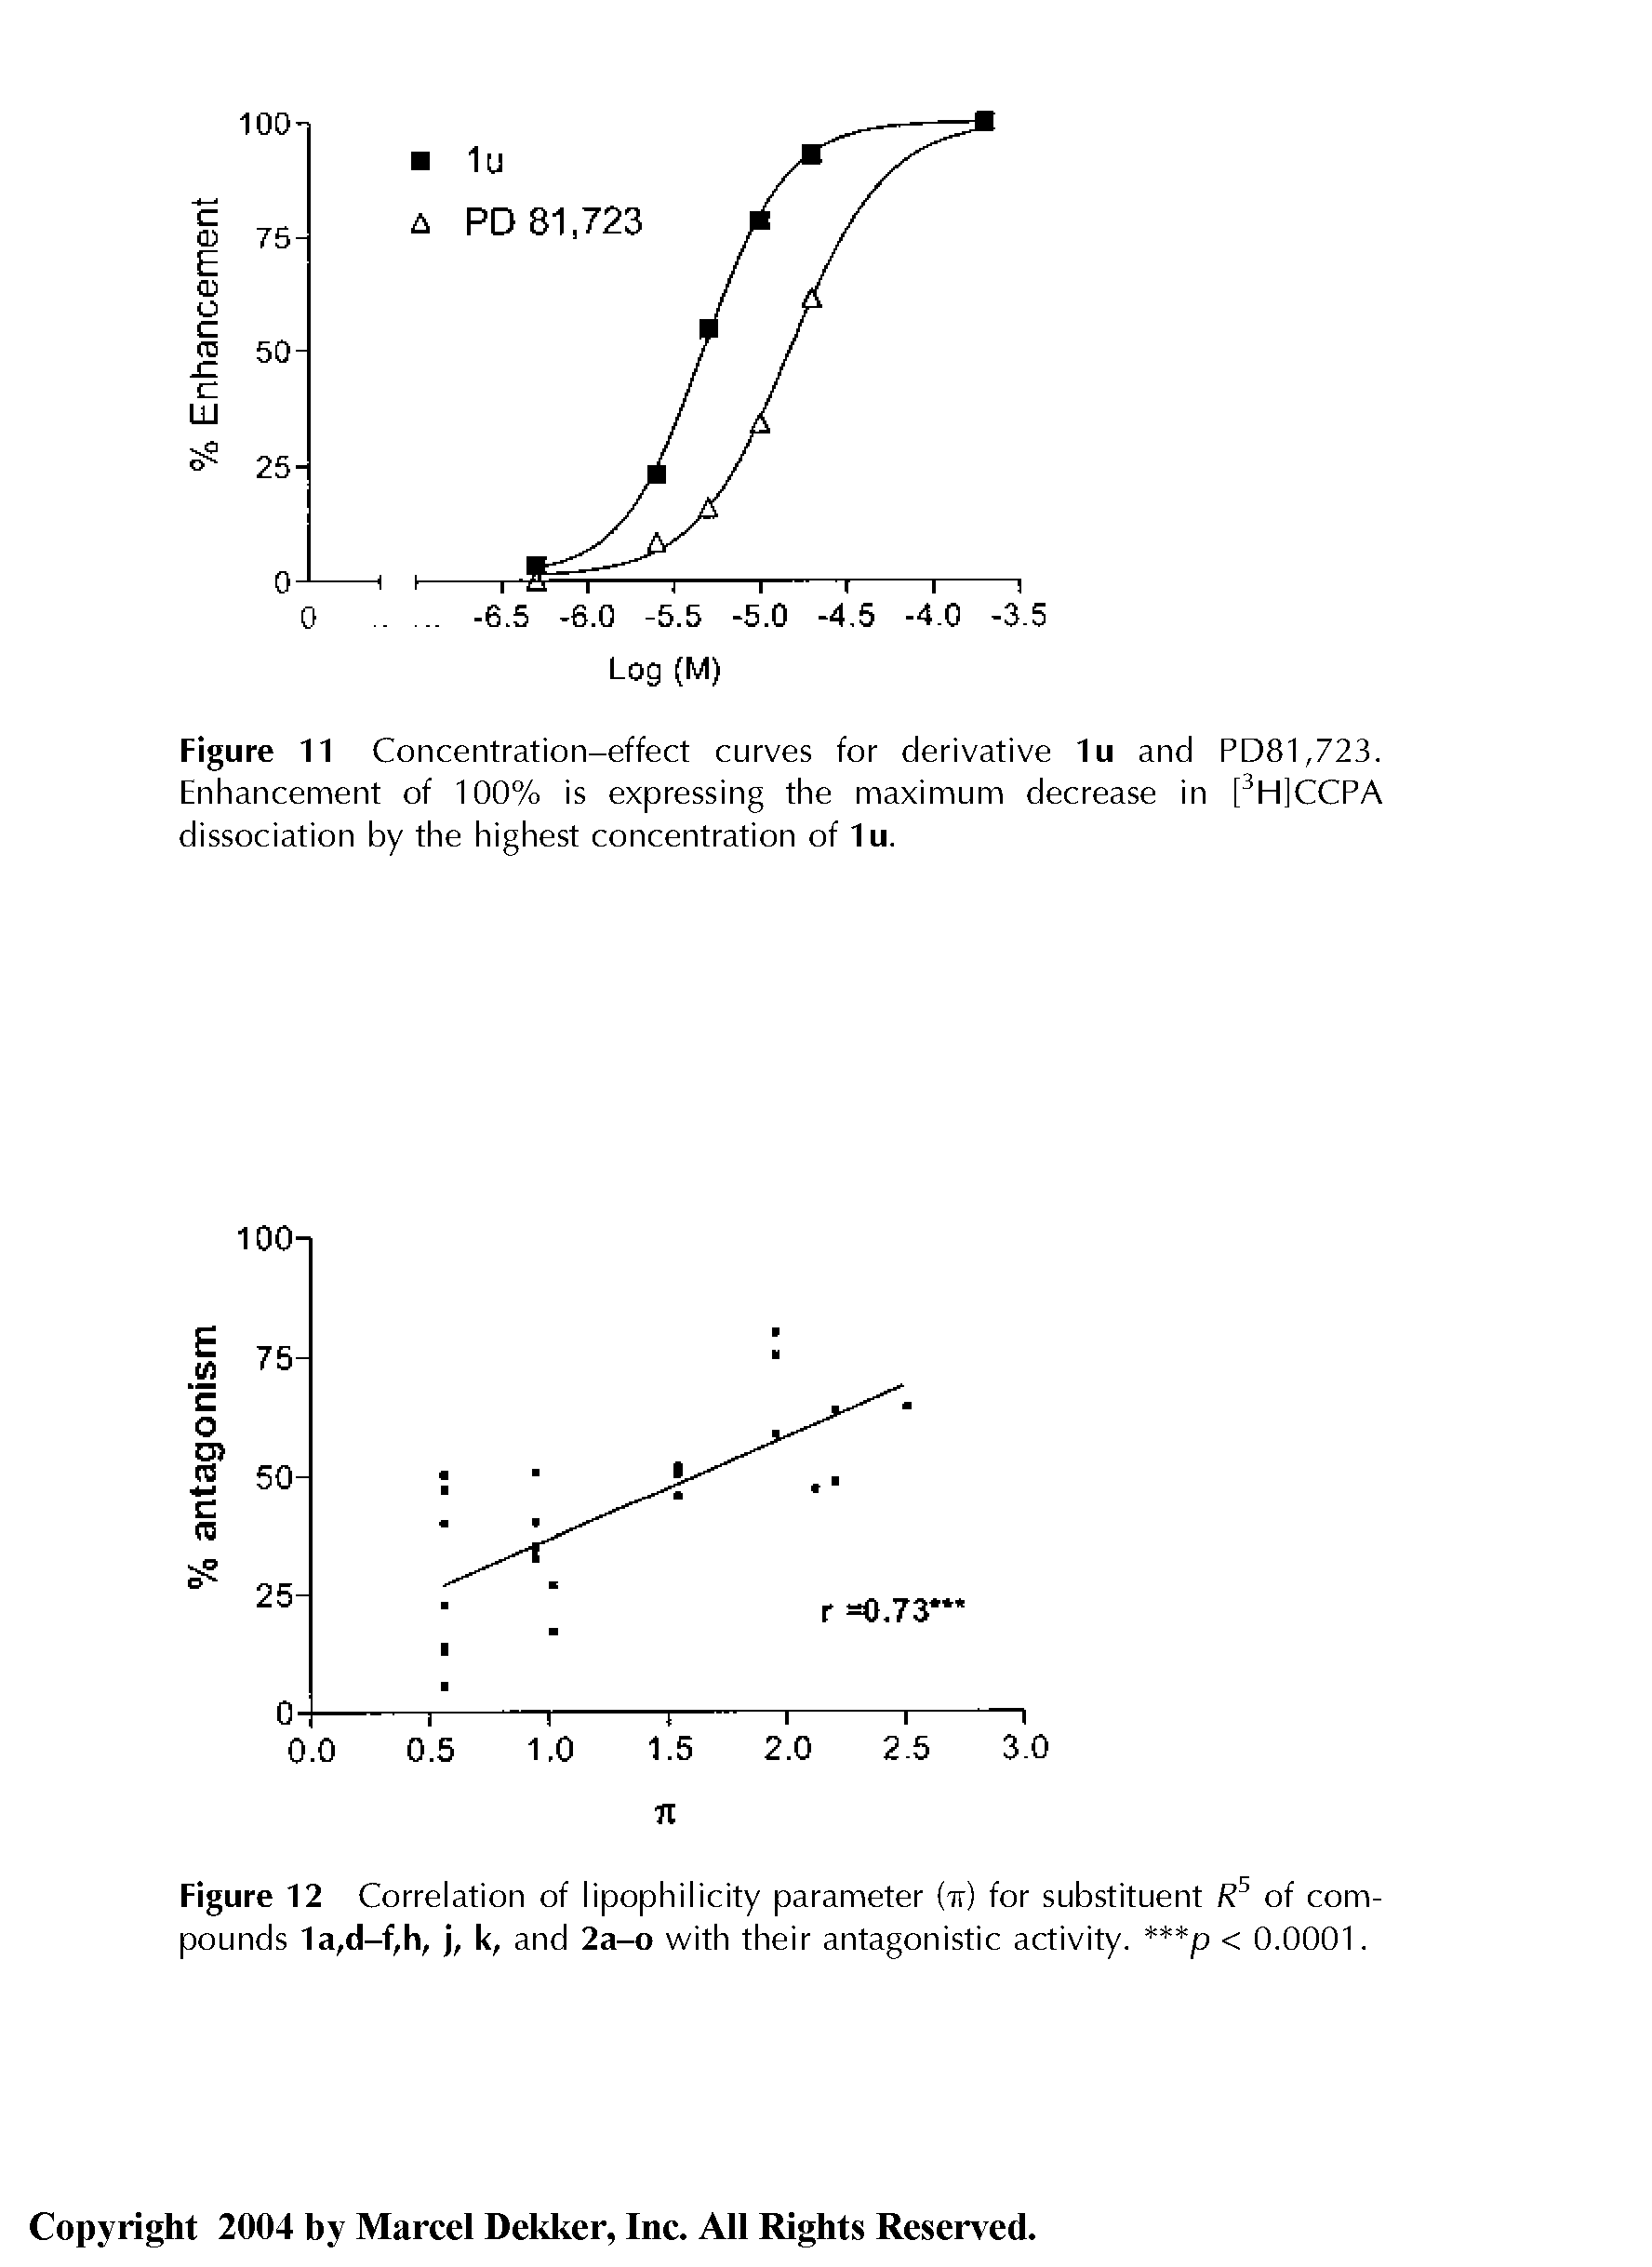 Figure 12 Correlation of lipophilicity parameter (it) for substituent R5 of compounds 1a,d-f,h, j, k, and 2a-o with their antagonistic activity. p < 0.0001.